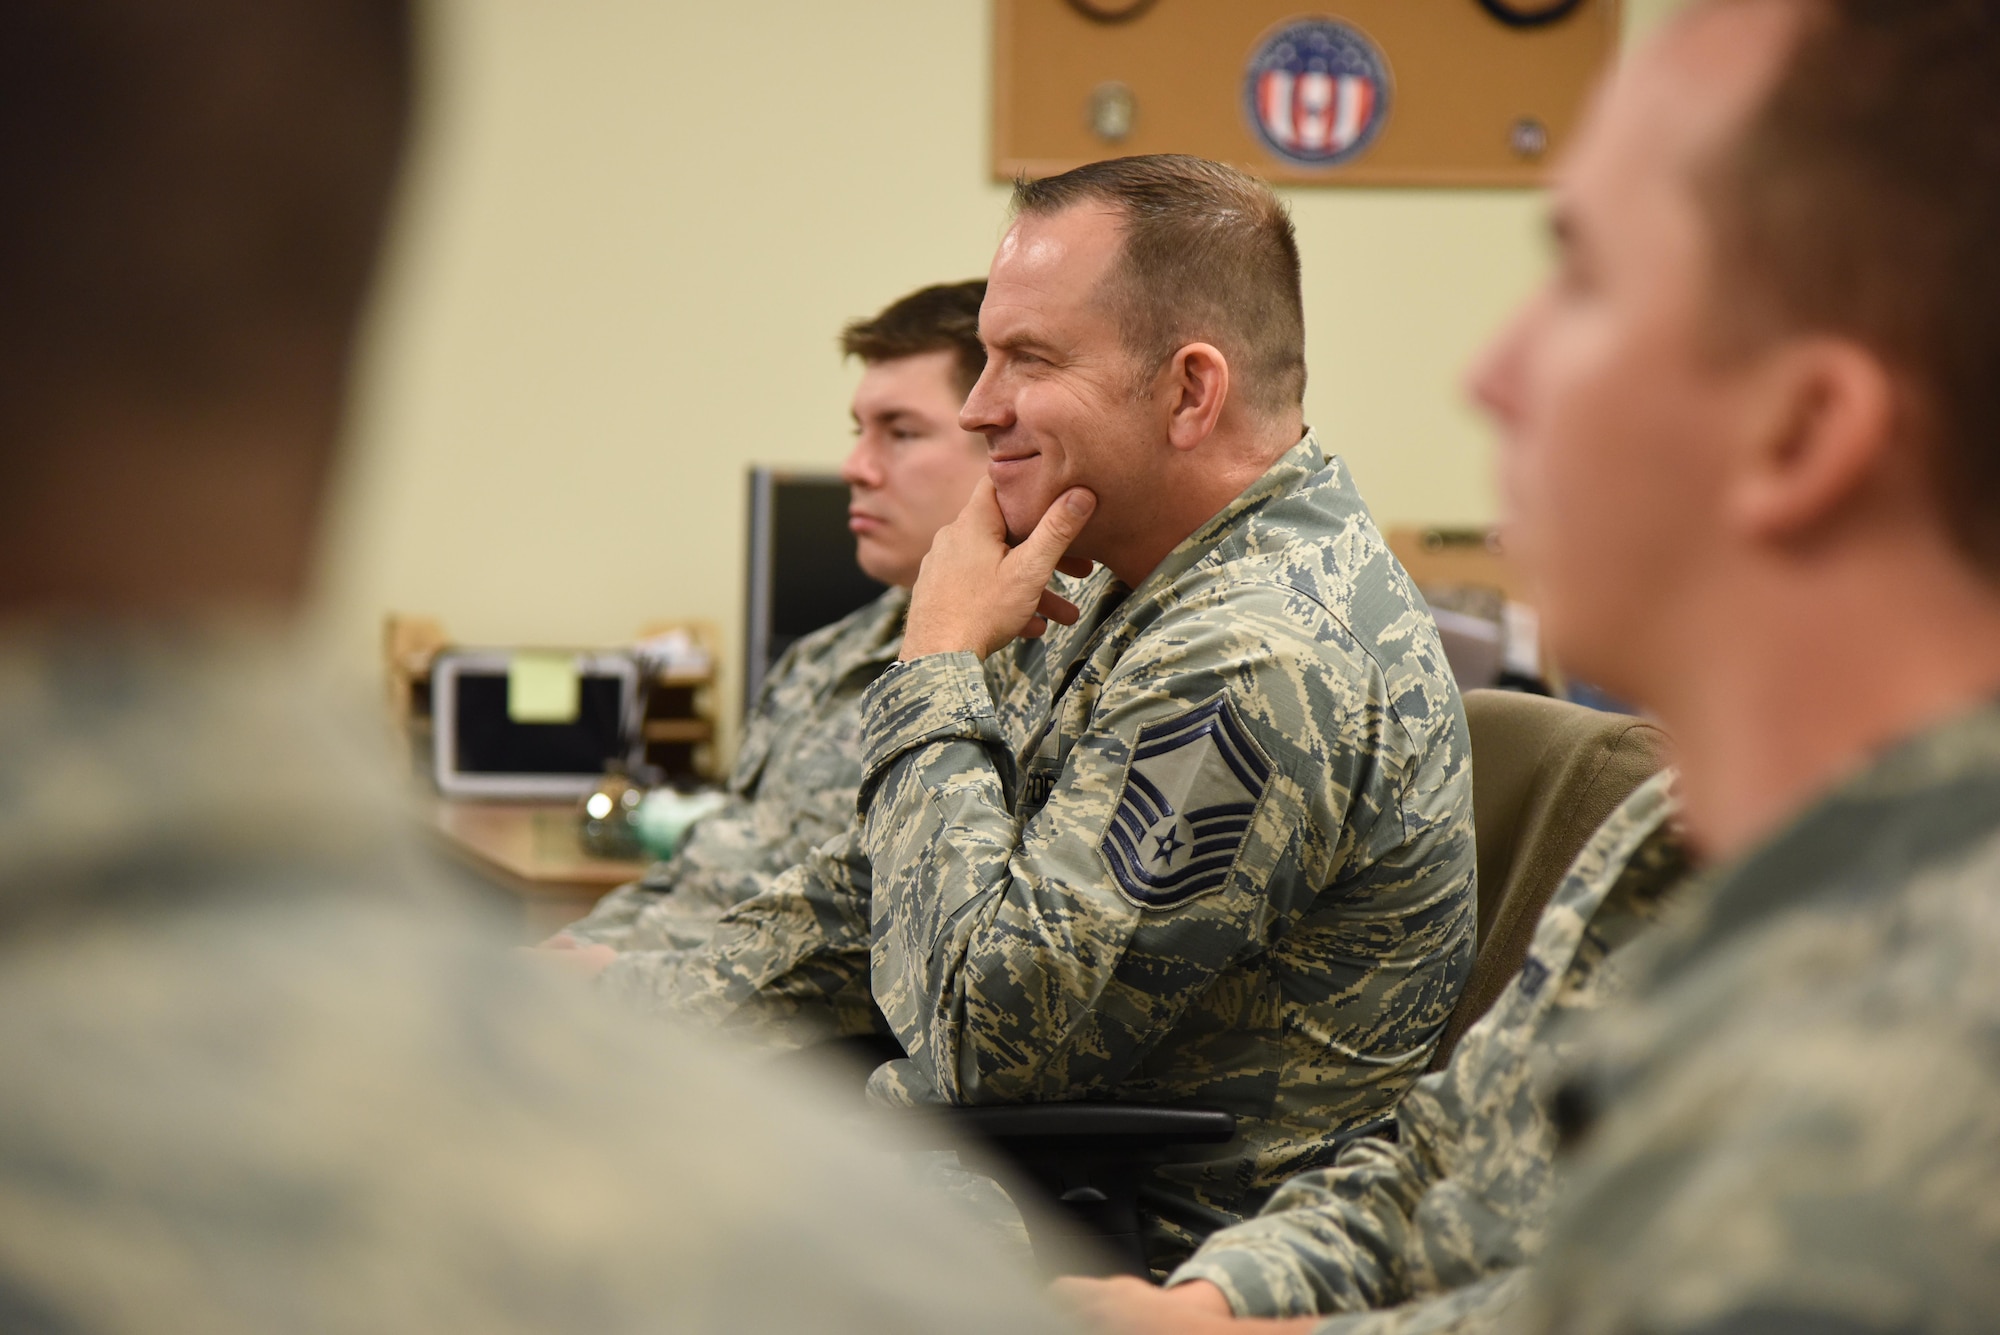 Senior Master Sgt. Marc Gibson, 81st Training Support Squadron Military Training Leader Course student, listens to Col. Michele Edmondson, 81st Training Wing commander, deliver welcoming remarks to MTL Course students at Allee Hall Nov. 29, 2016, on Keesler Air Force Base, Miss. This is the second class to attend the schoolhouse’s new four-week course curriculum, which was upped from two weeks and boasts a higher level of hands-on, practical application than its previous format. (U.S. Air Force photo by Kemberly Groue)